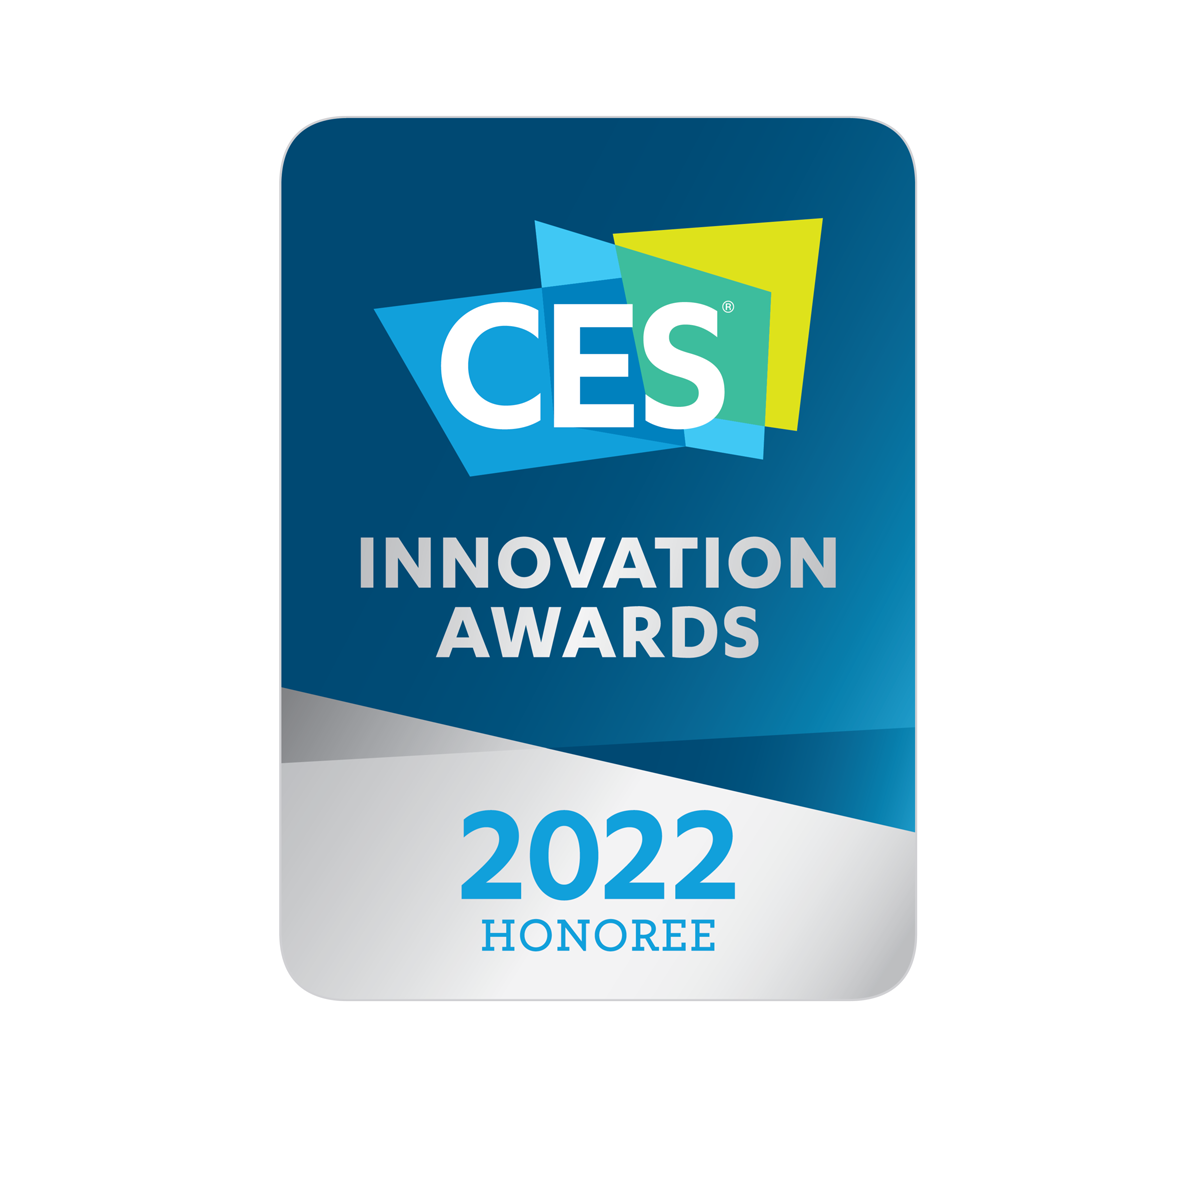 CES 2022 Innovation Awards: Honoree